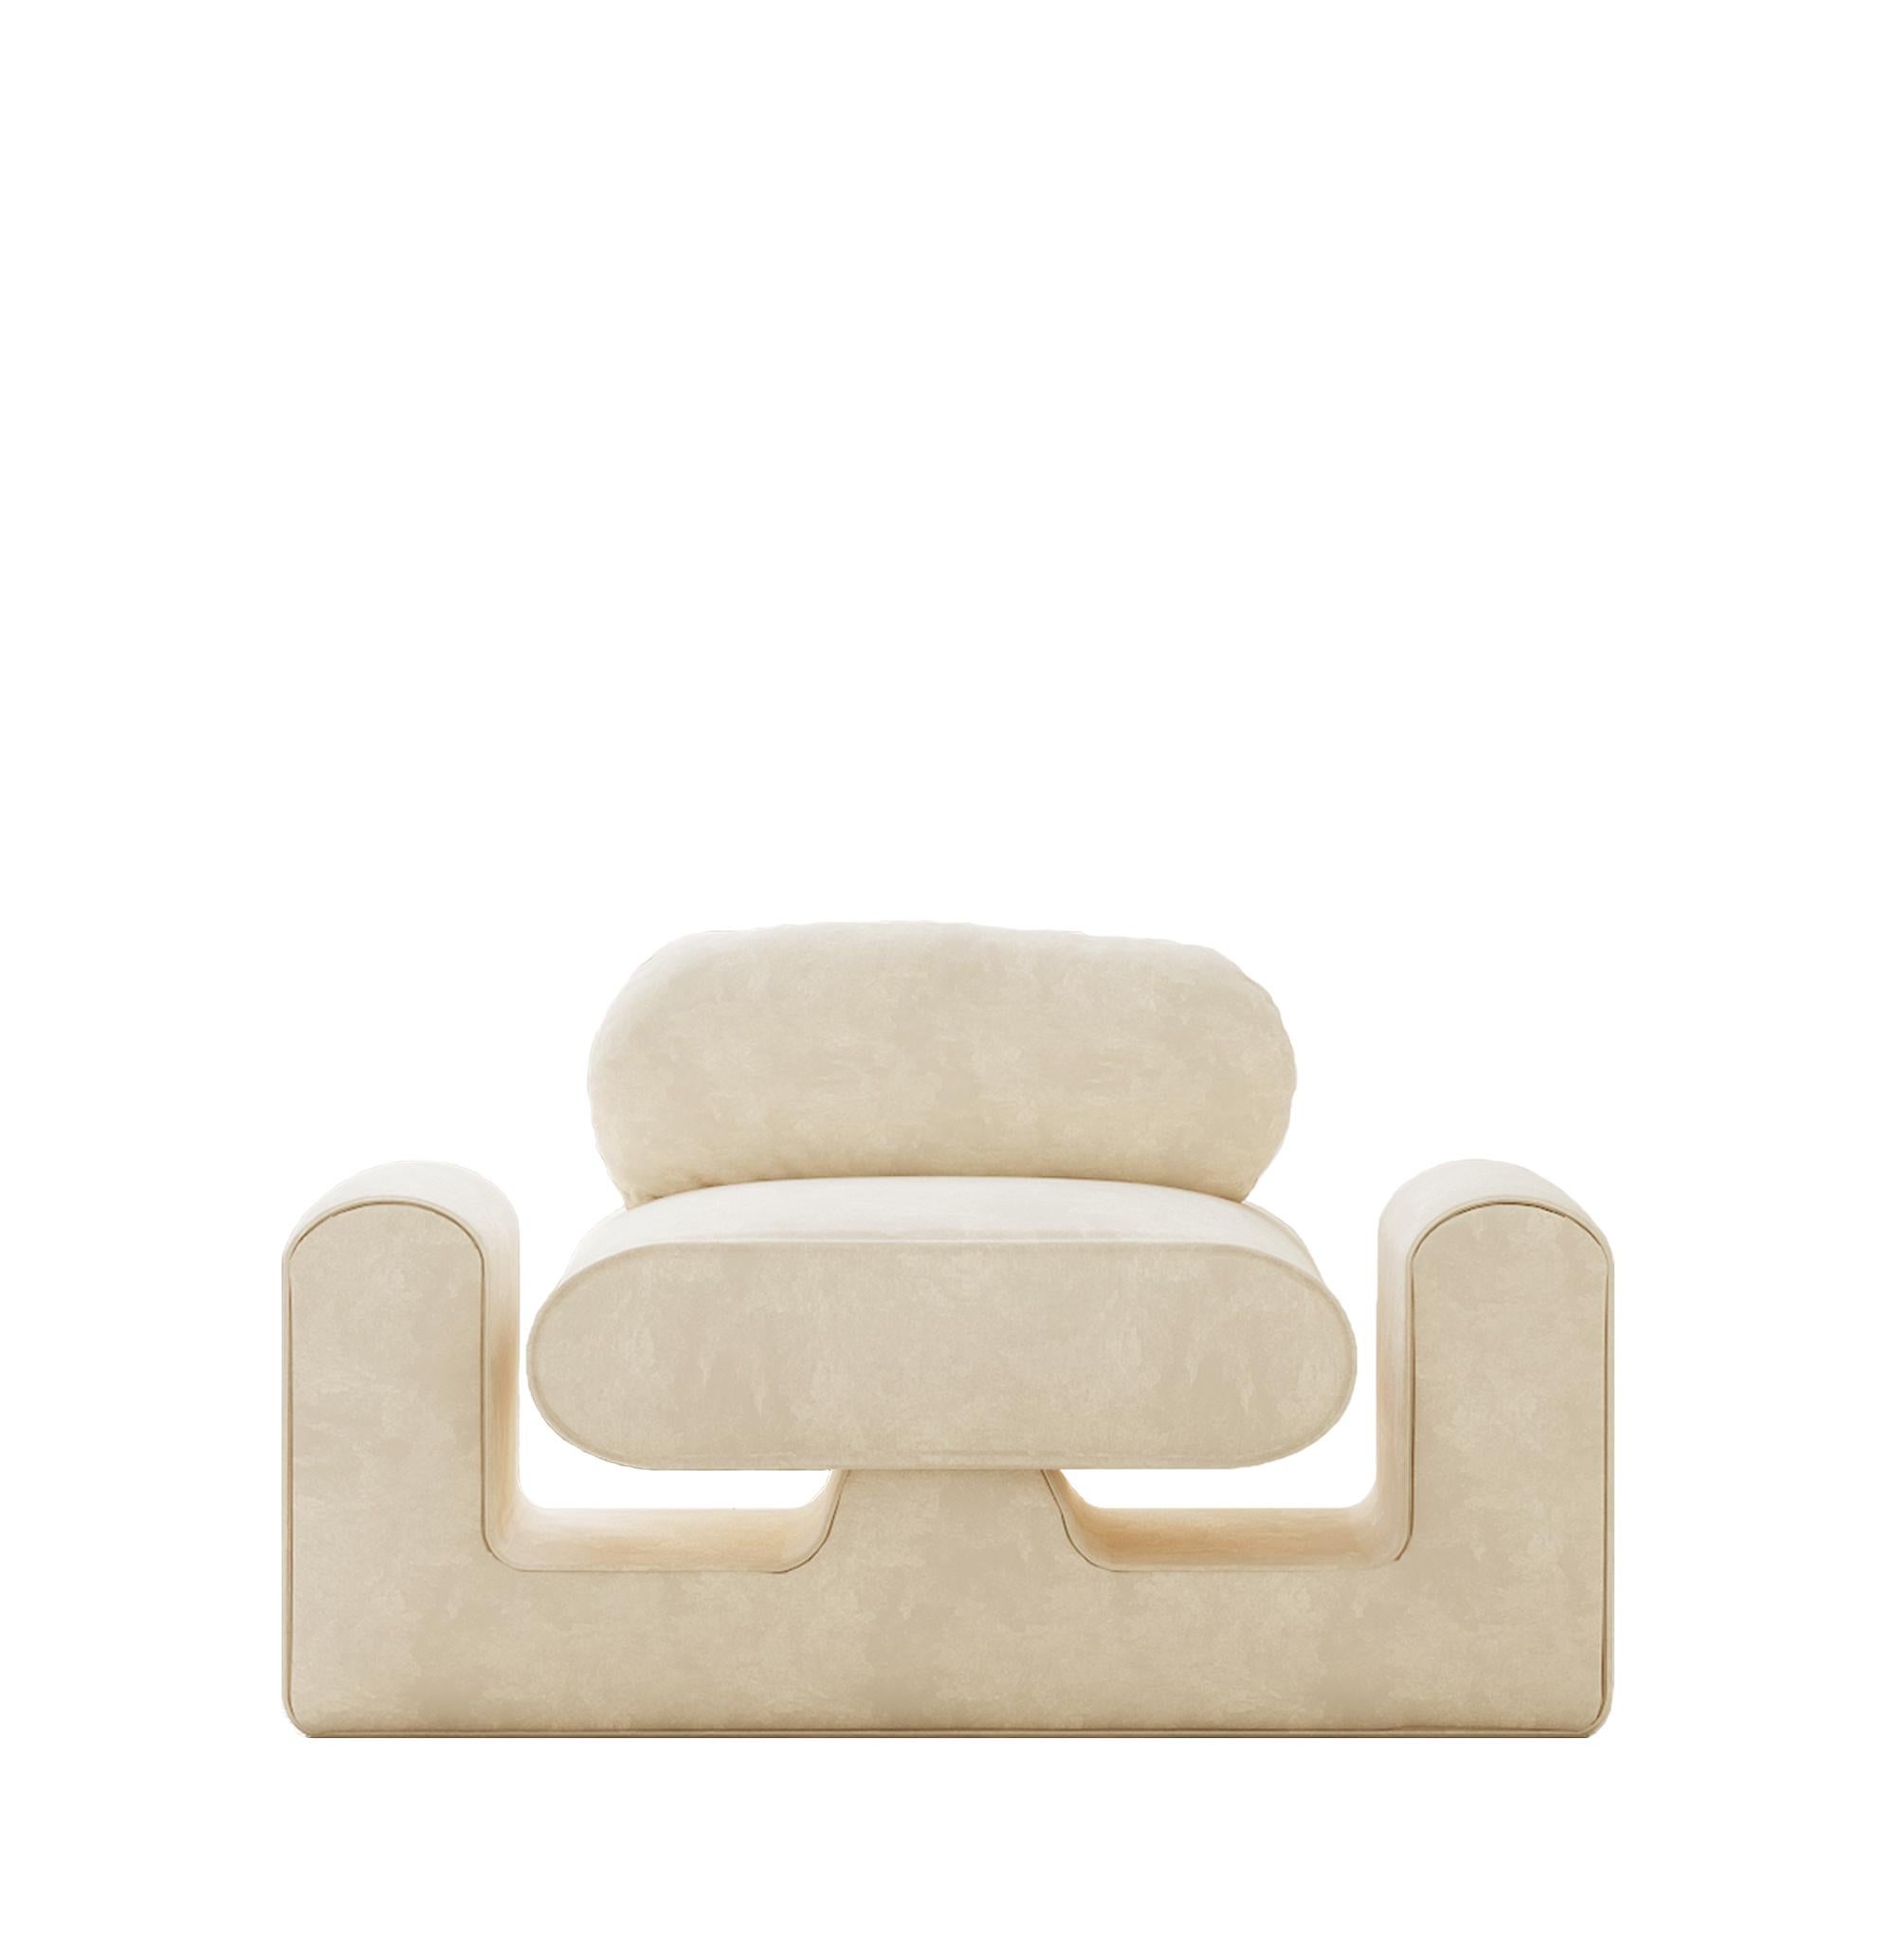 Hug White Chair by Rejo Studio
Dimensions: D 115 x W 70 x H 70 cm
Materials: Wooden structure, with Velvet or silk
Also Available in different colours.

We designed the chair to feel as if you are being embraced by your own world,
in spite of